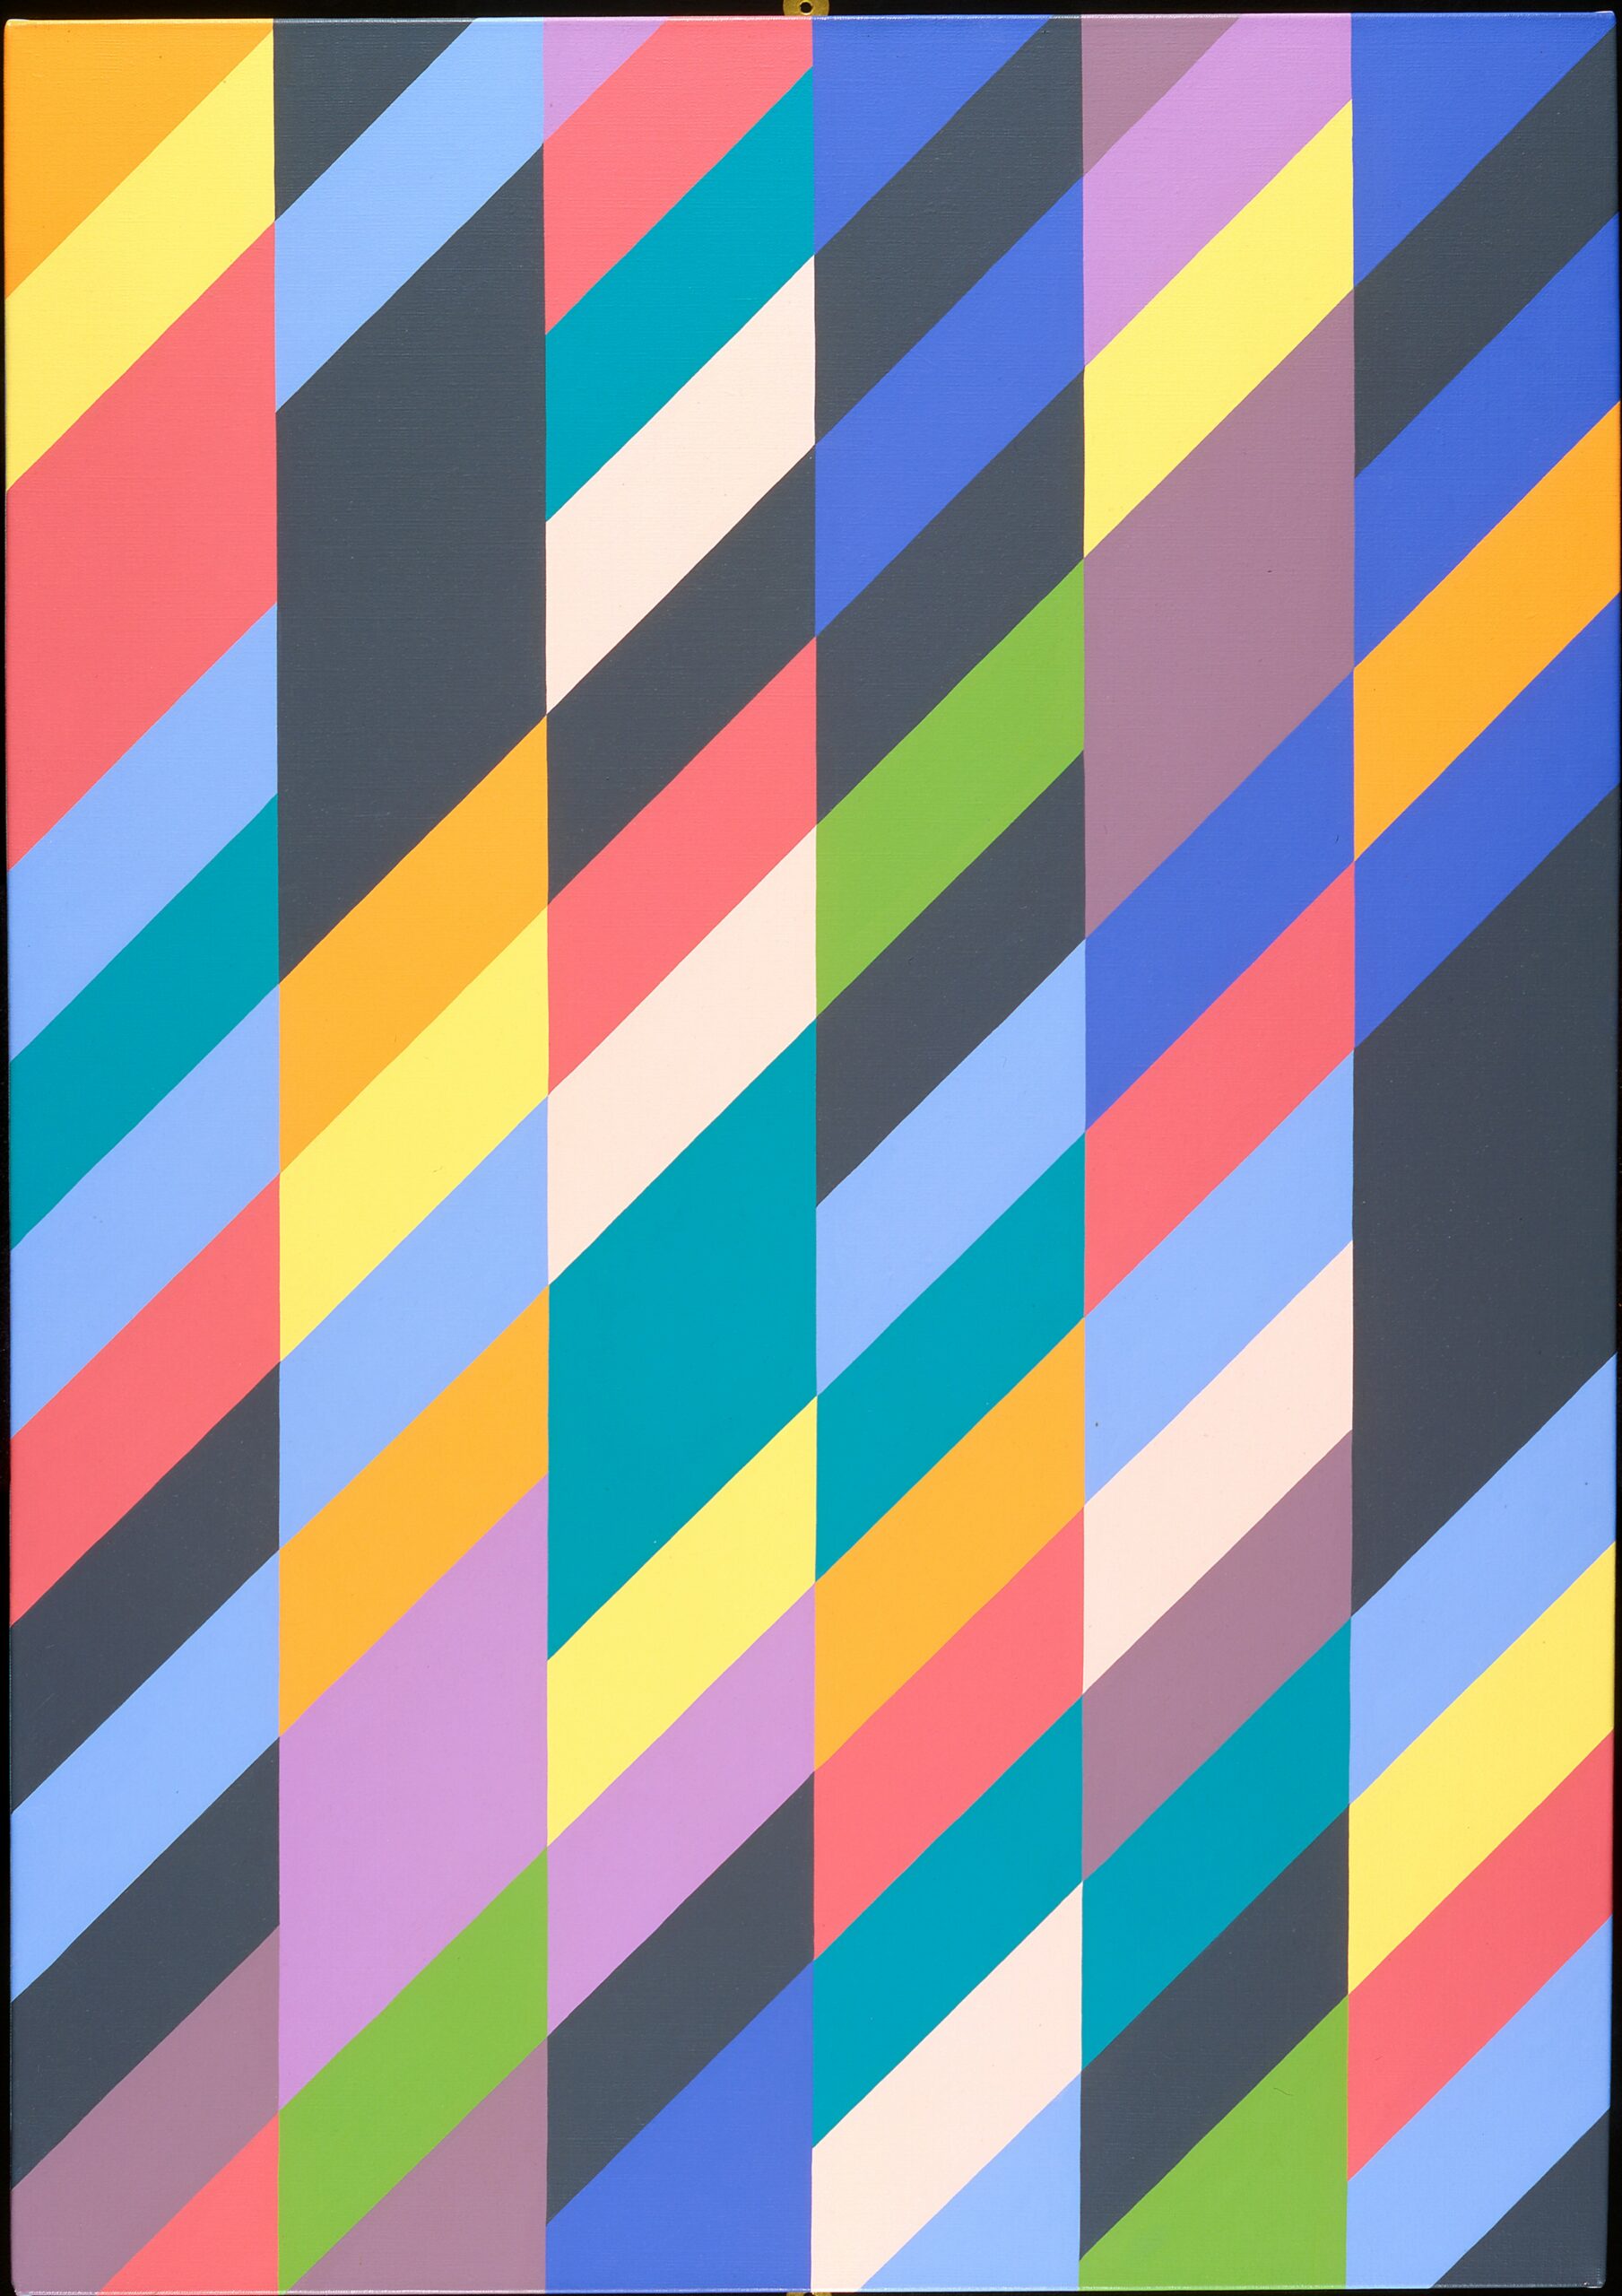 A photograph of the artwork Shadow Play, by Bridget Riley. The artwork consists of tens of diagonal stripes in different colours of blues, yellows, greens, pinks, and greys.